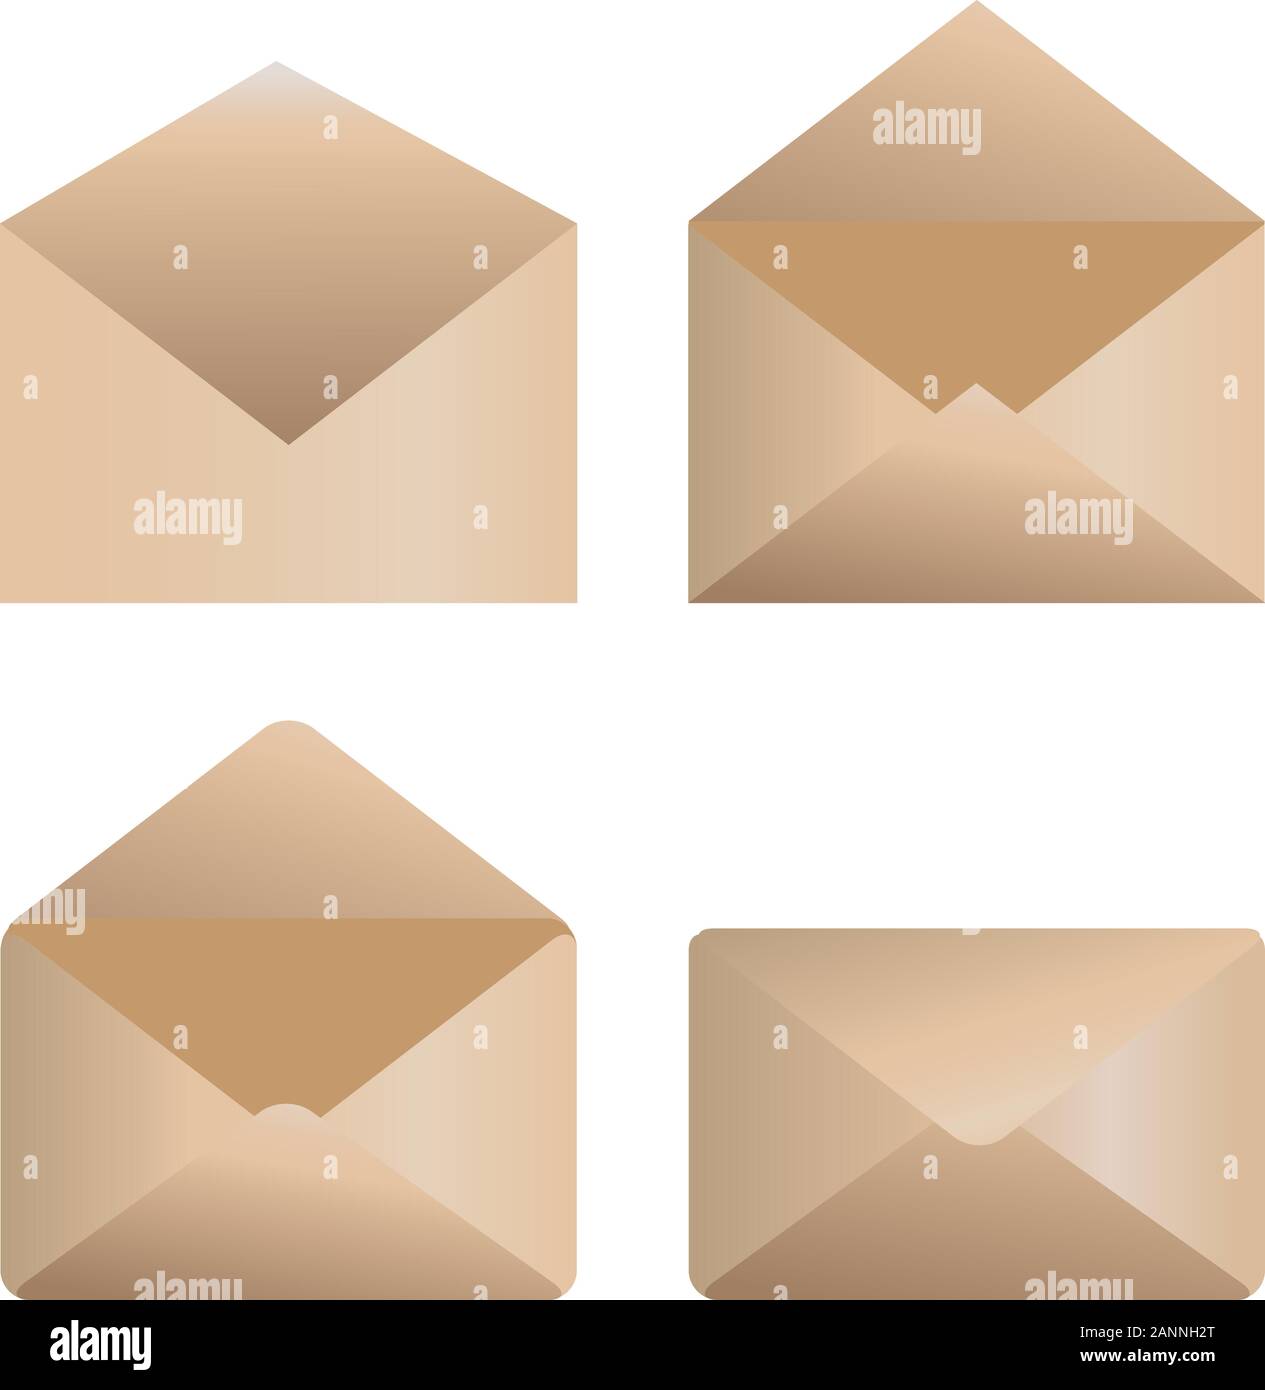 Web icons open and close envelopes on white background. Stock Vector